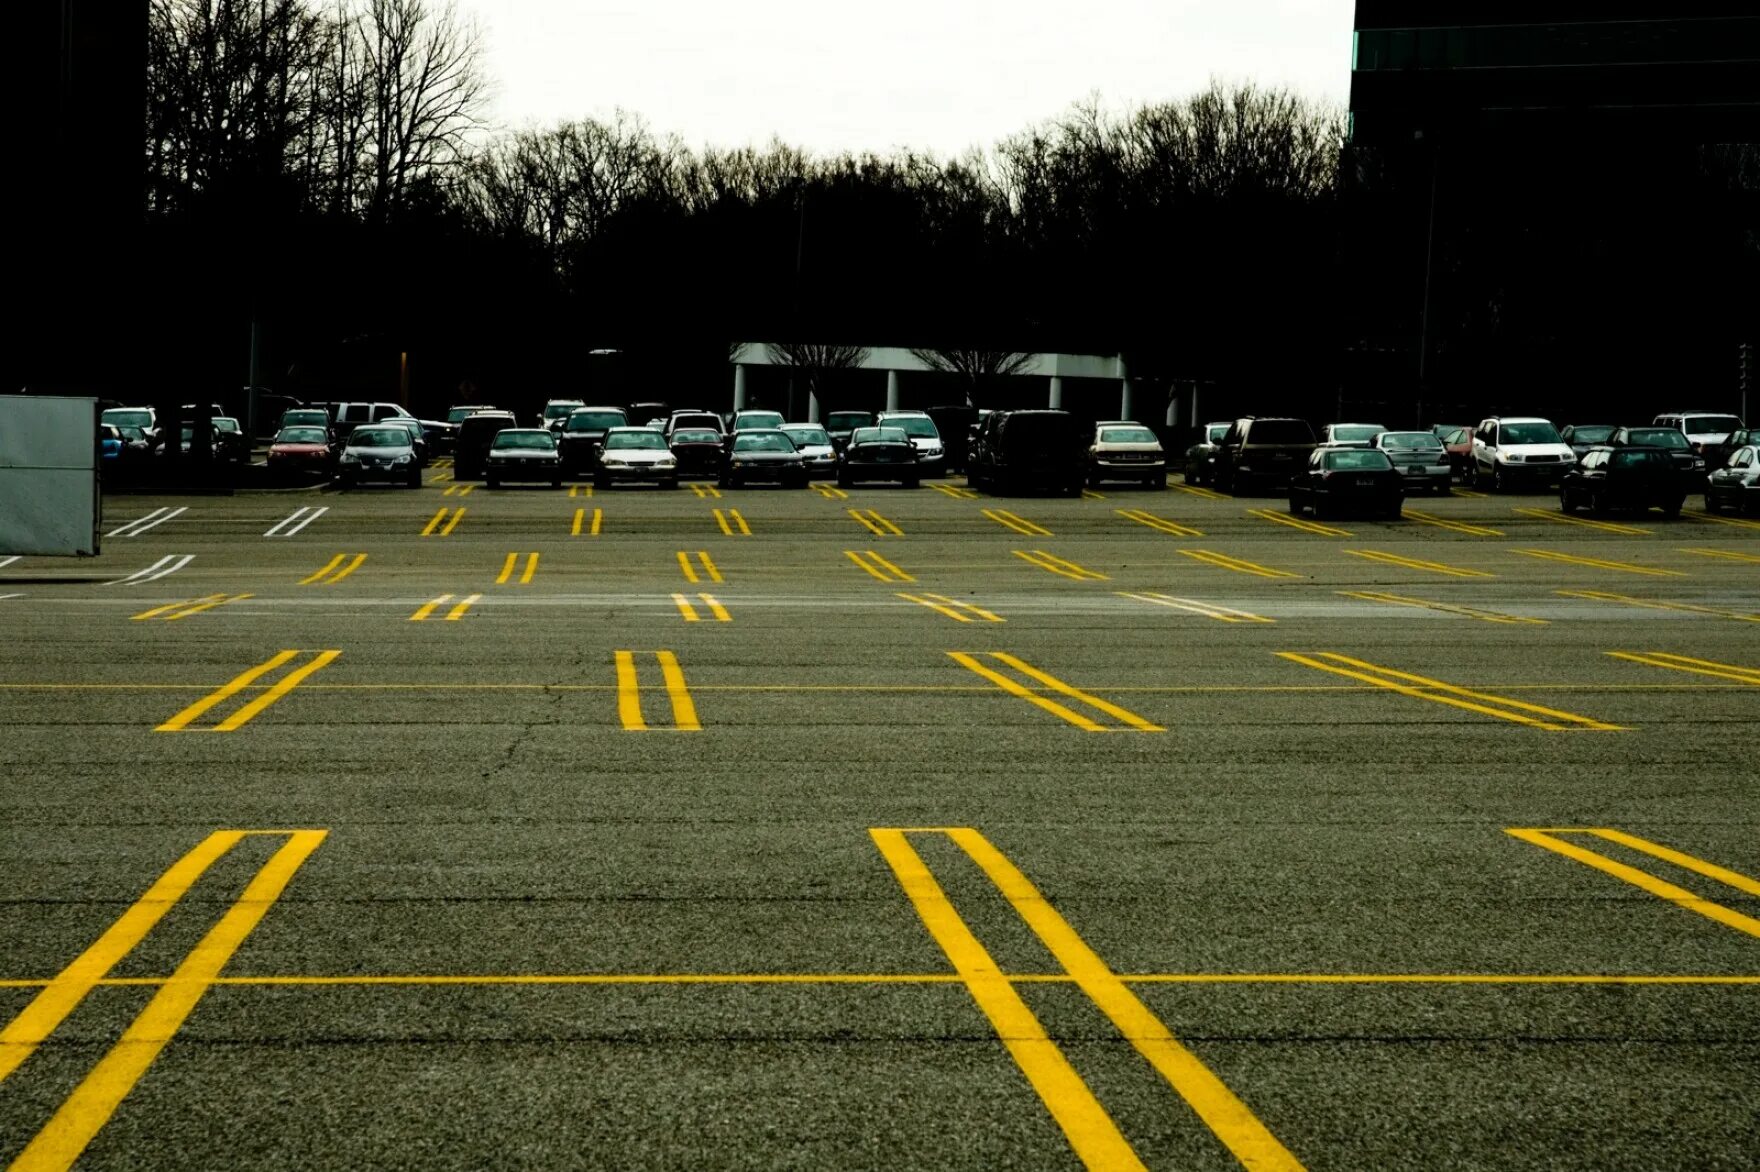 Parking. Parking Station. Parking lots. Driving in the parking lot. The lot of drive